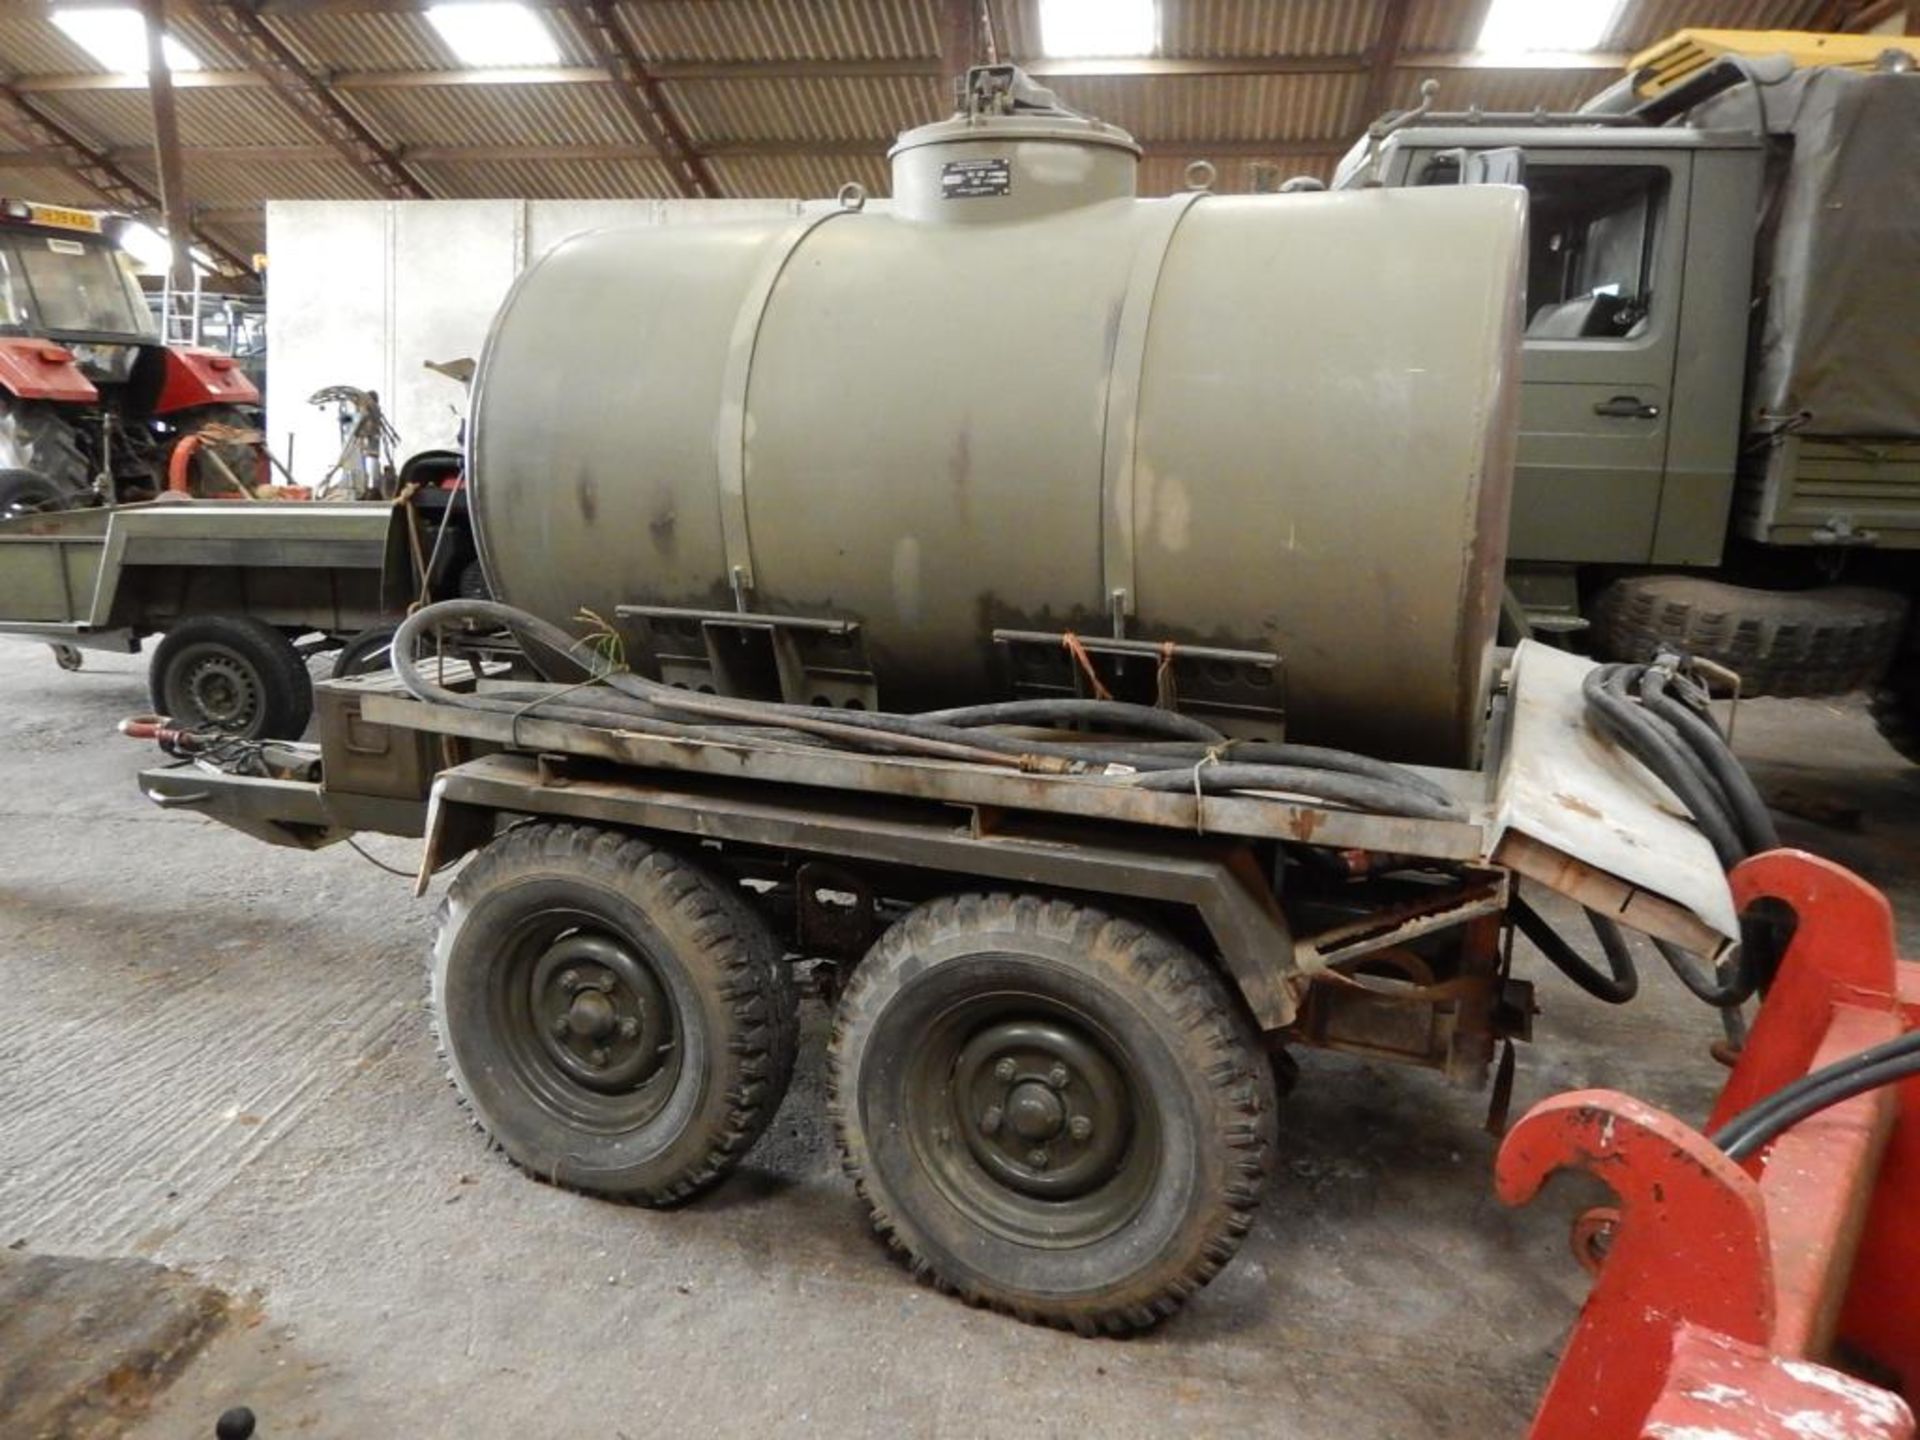 Tandem axle ex-MOD 2,000ltr fuel bowser with petrol generator, delivery hose and nozzle (unbundled) - Image 2 of 2